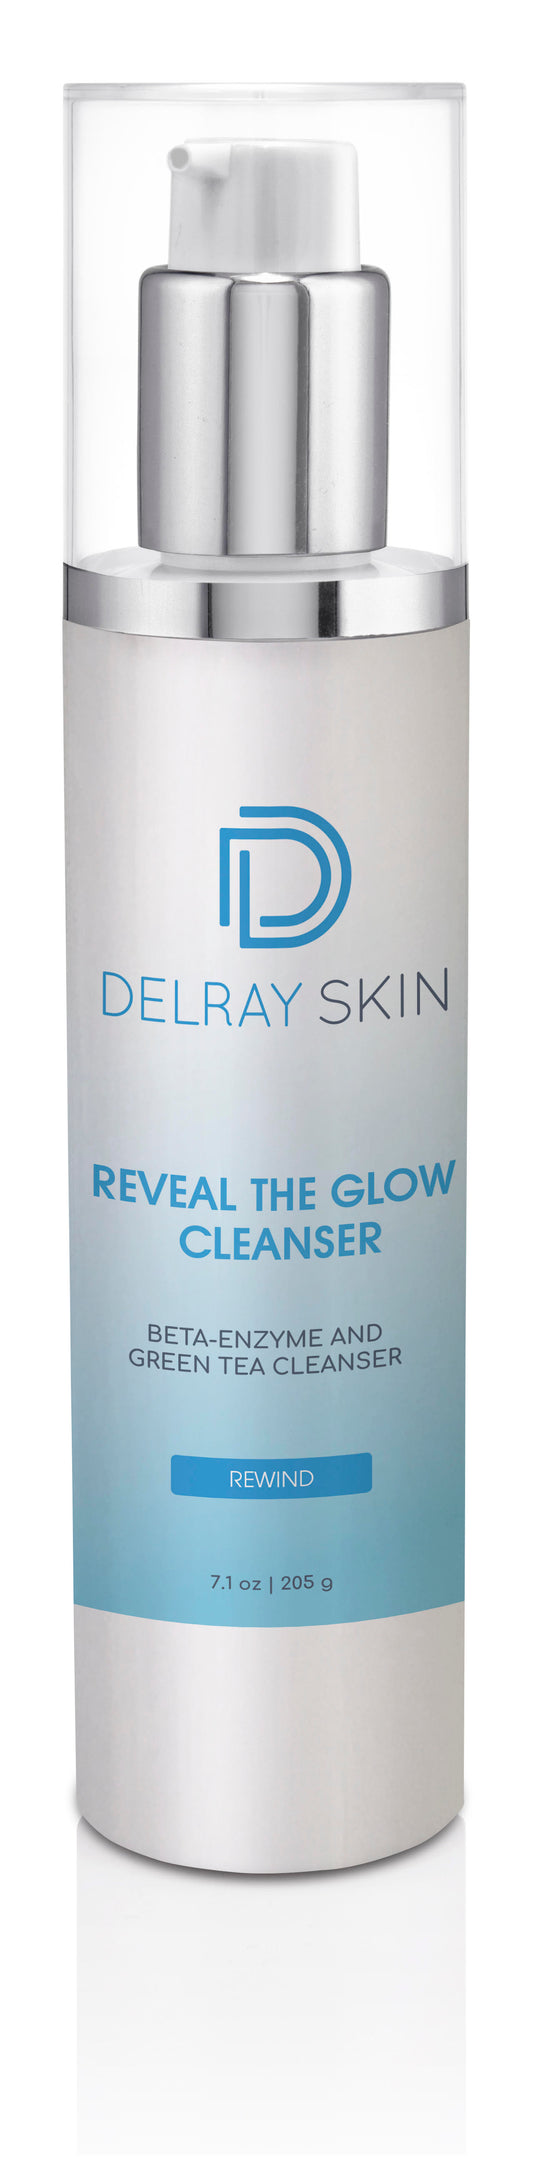 Reveal The Glow Cleanser